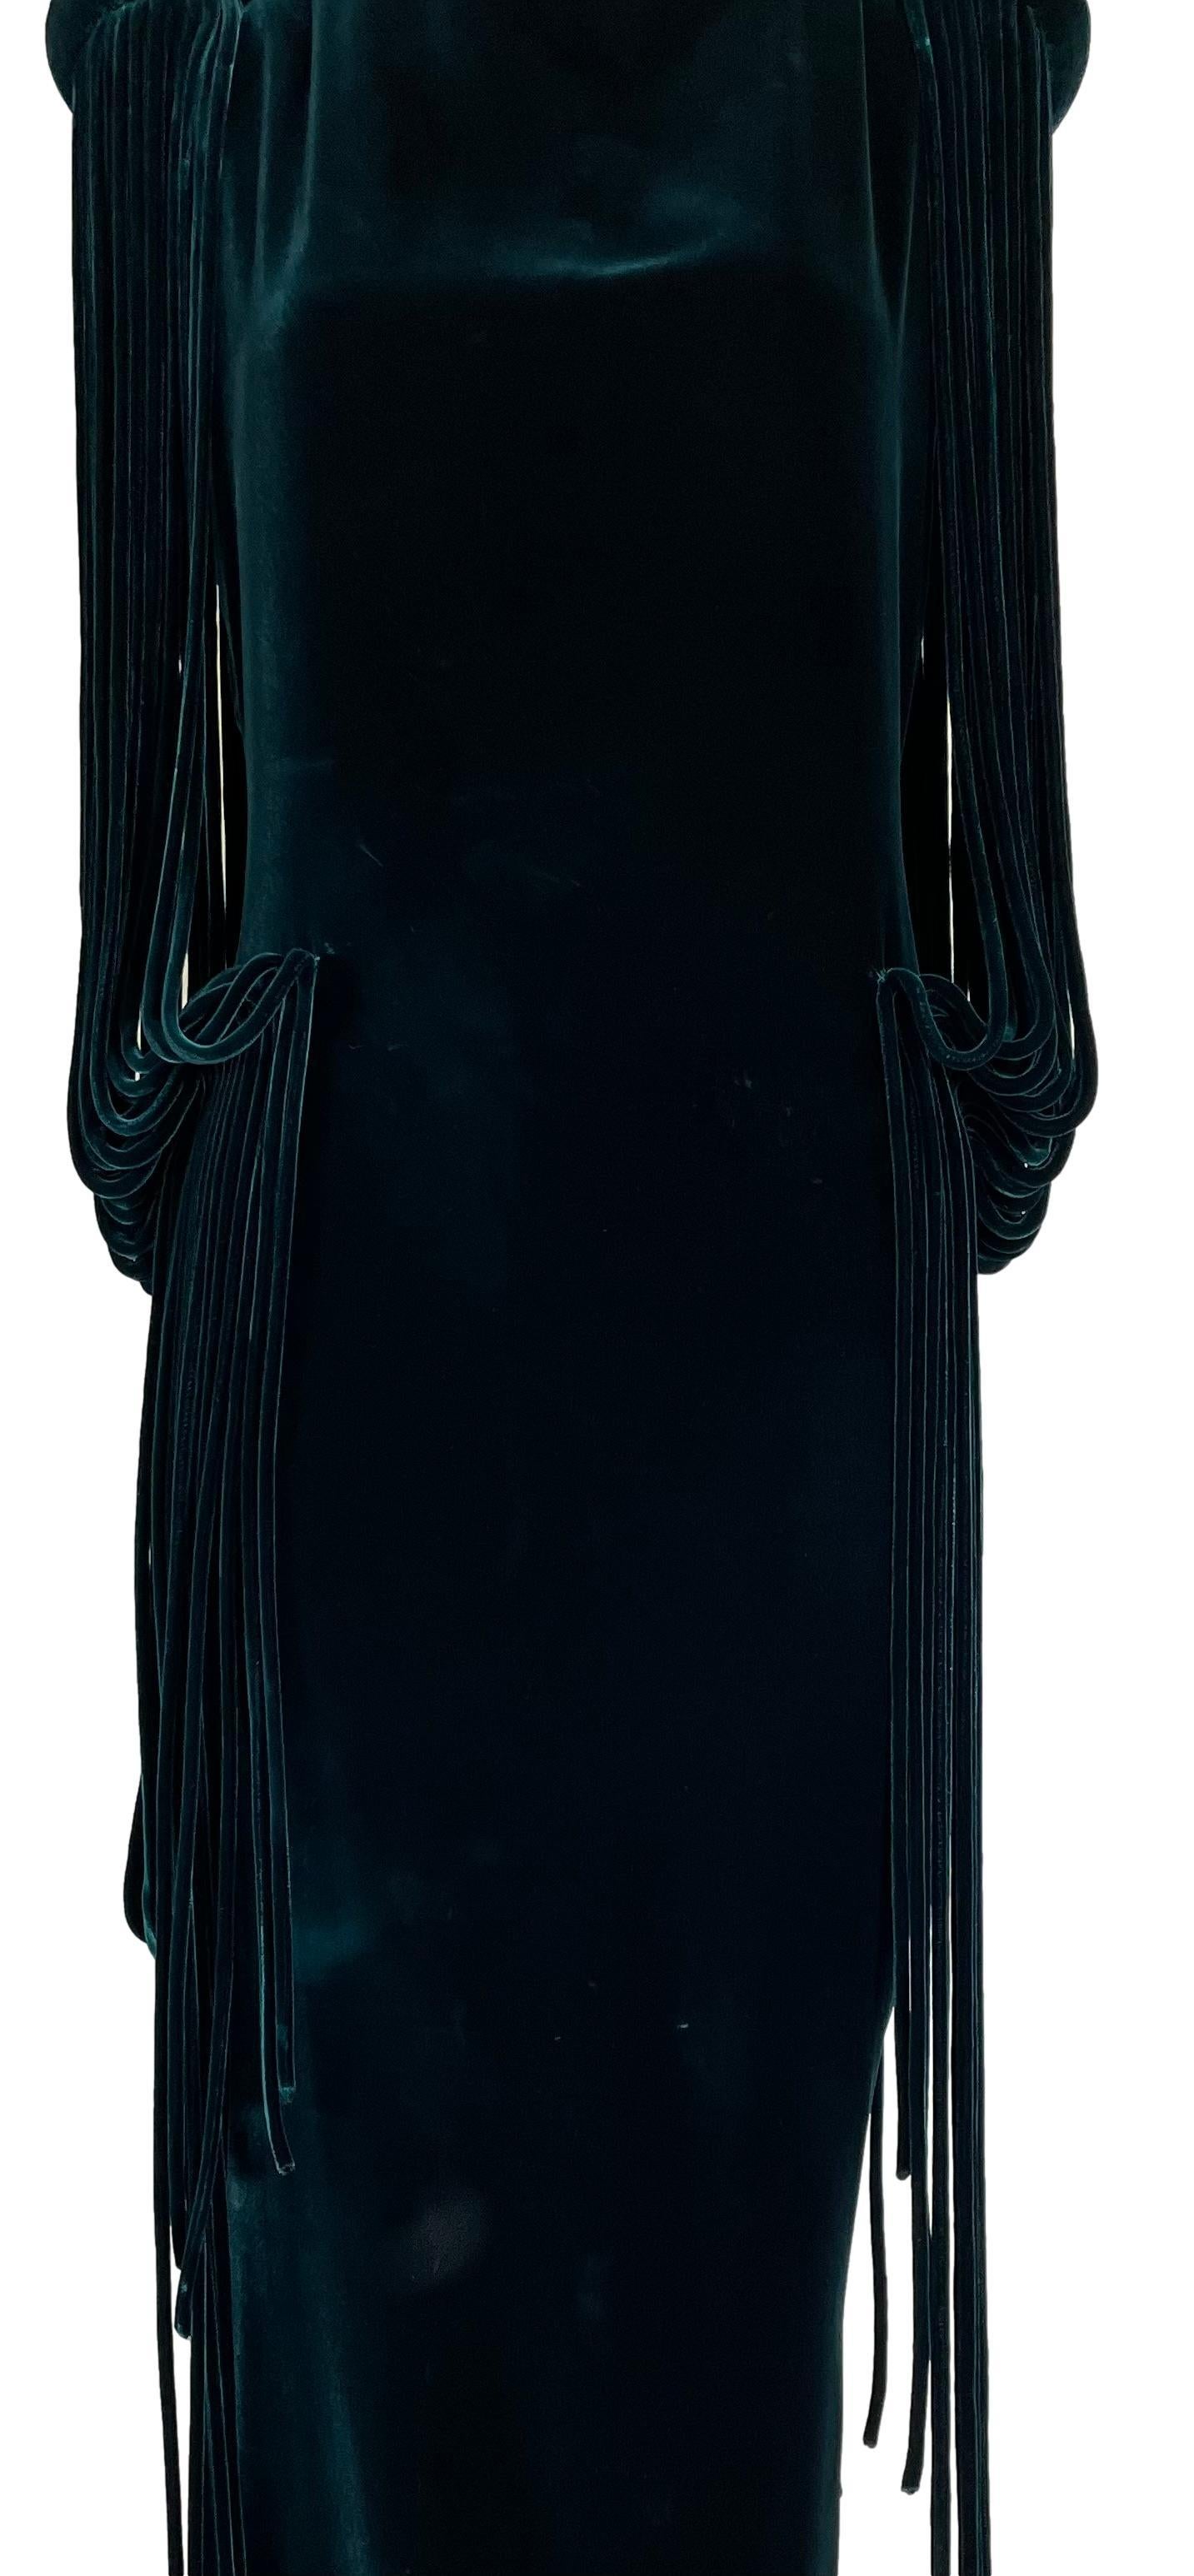 **THANK YOU FOR SHOPPING WITH MES DEUX FILLES**

DESIGNER: F/W 2007 Jean Paul Gaultier Haute Couture Runway-  the dress on the runway had cuffs that attached to the fringe pieces as sleeves but this dress is sleeveless and just has the long fringe